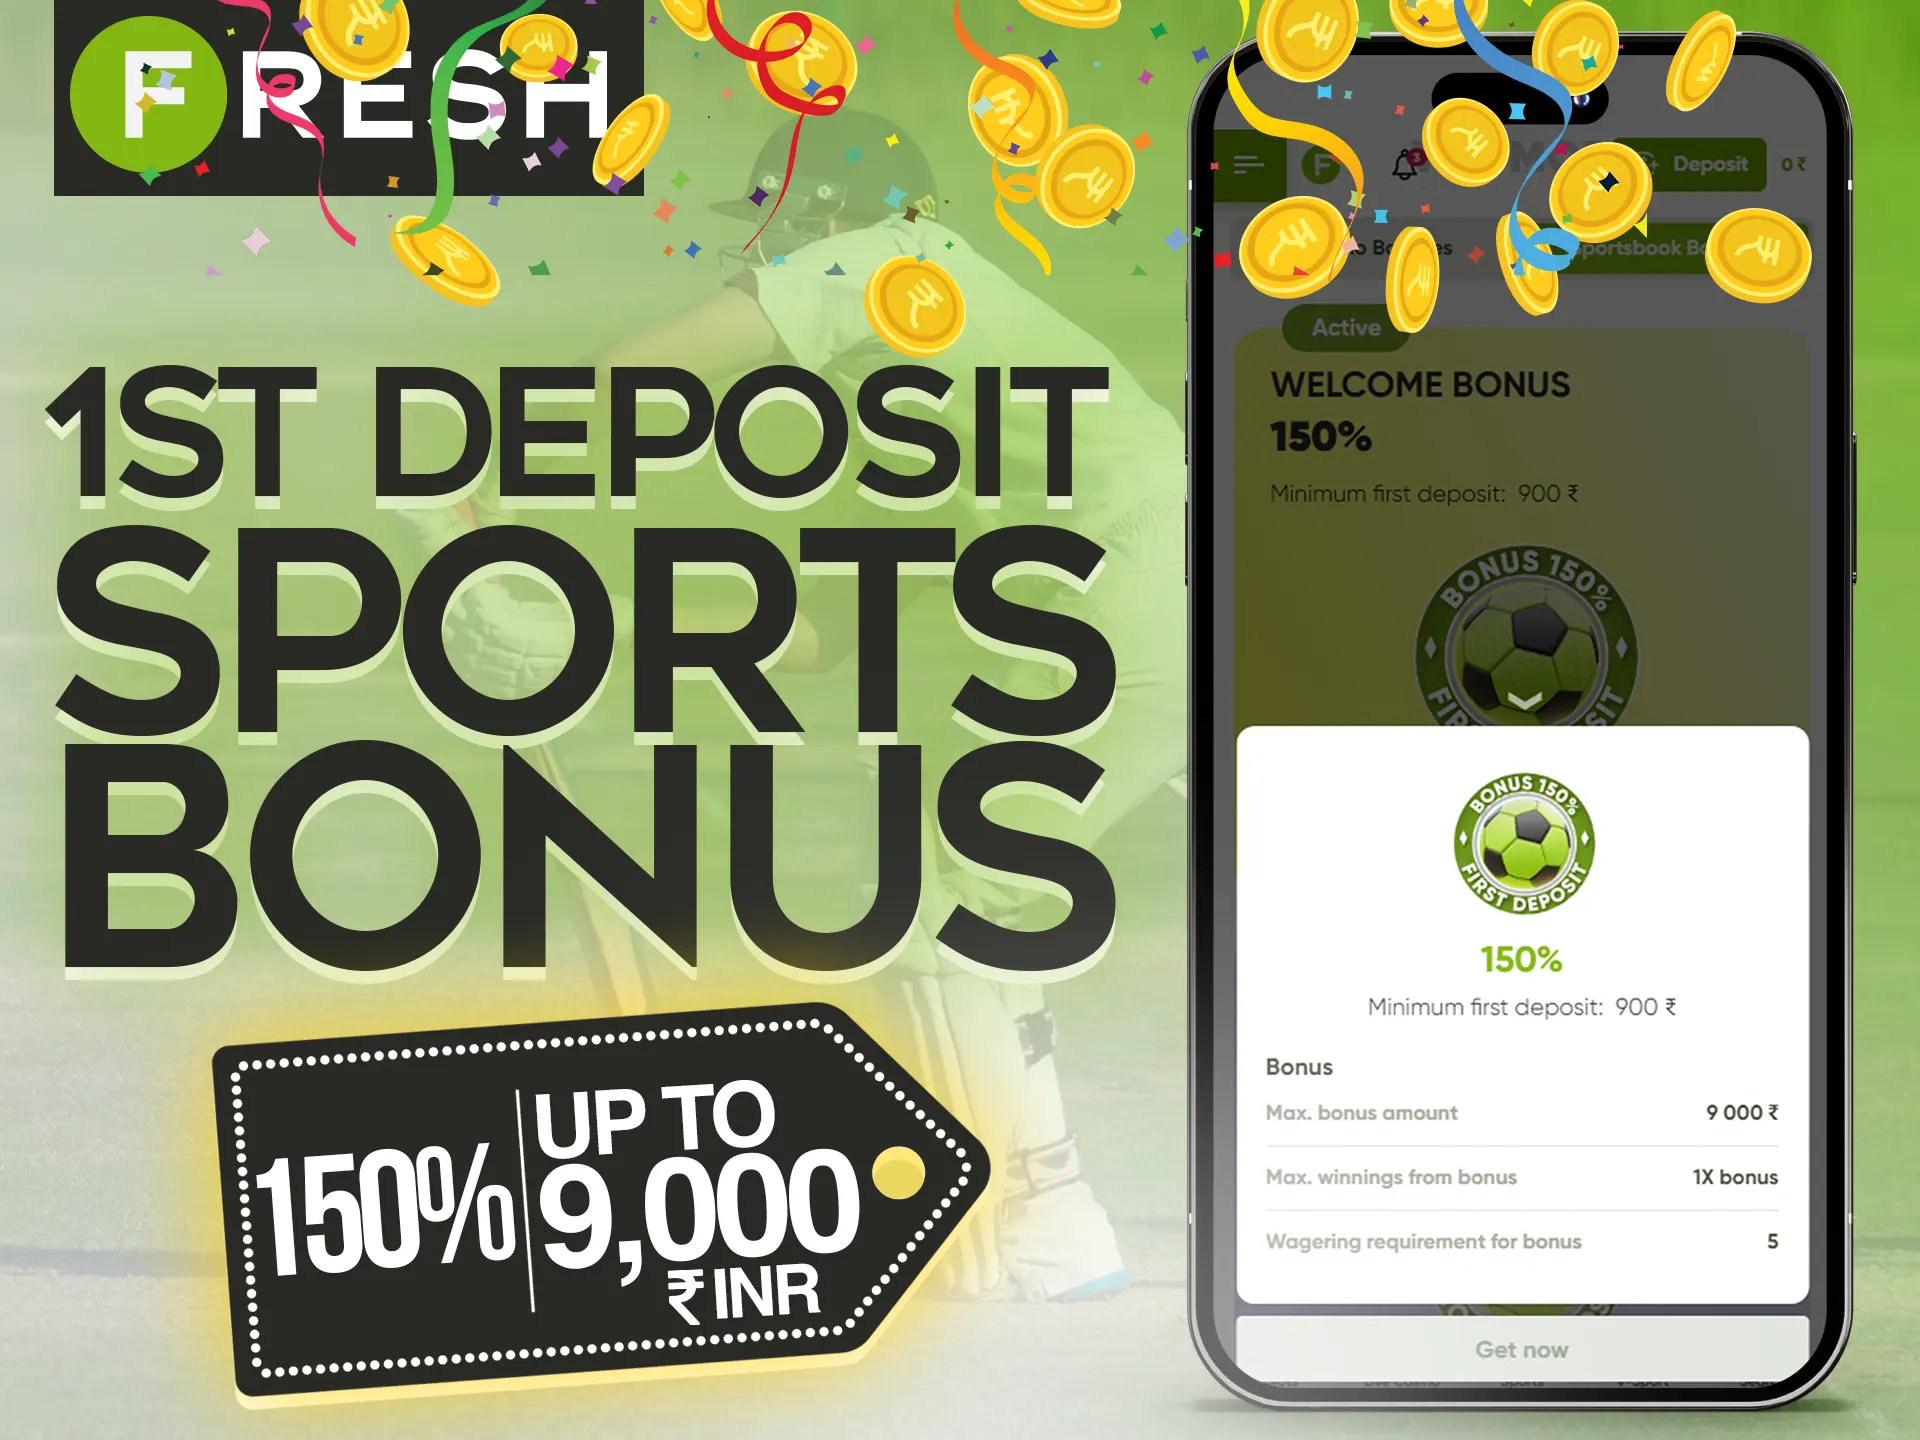 Get a bonus on sports after the first deposit in the Fresh Casino app.